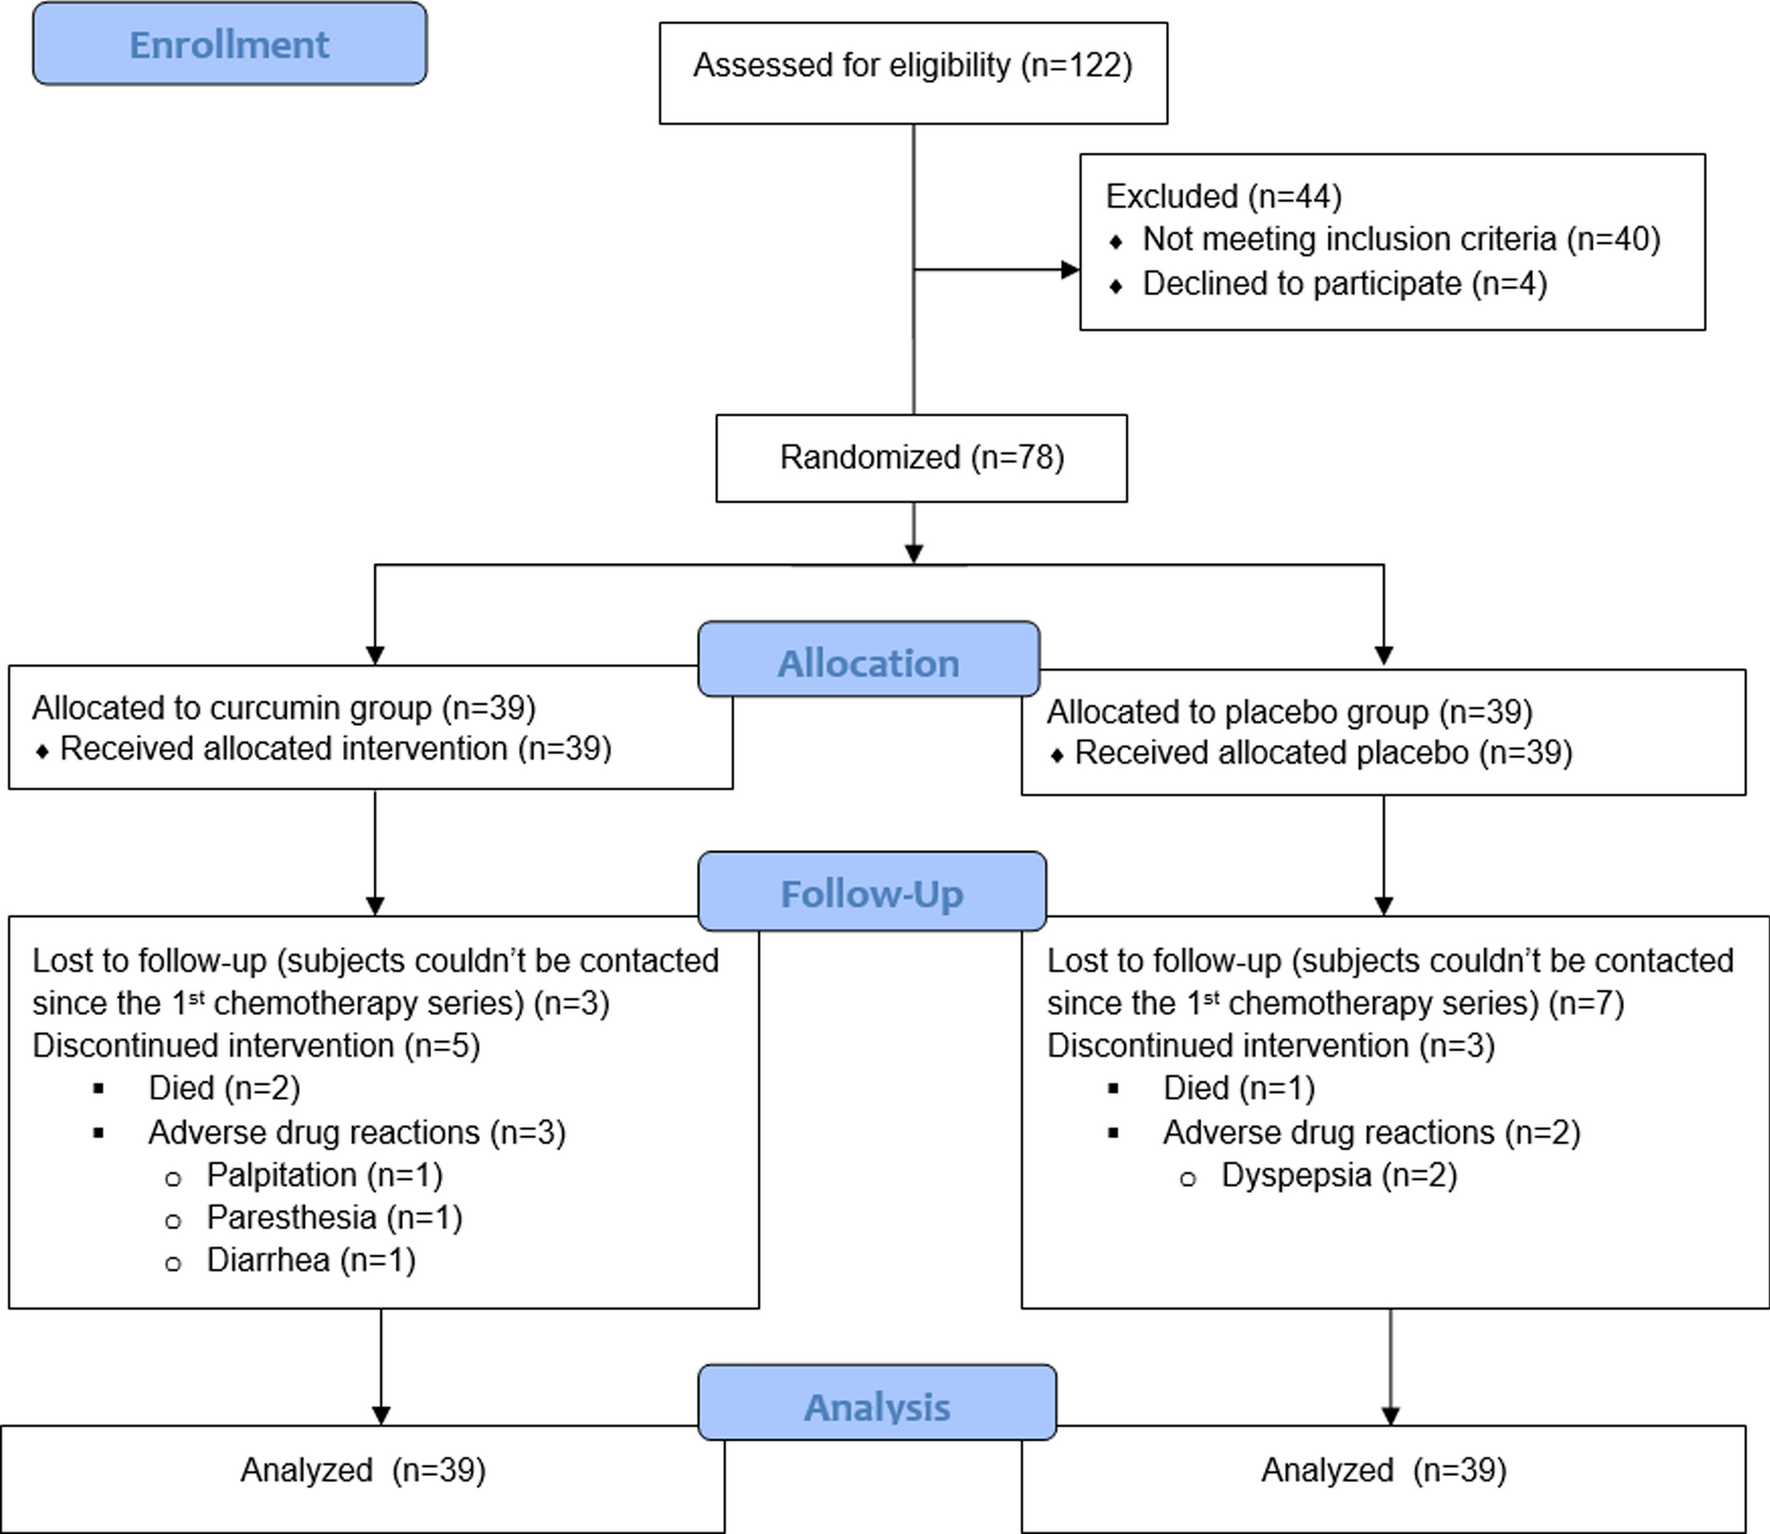 Improving cognitive function with intermittent dose escalation of curcumin extract in chemotherapy-induced cognitive impairment patients: a randomized controlled trial